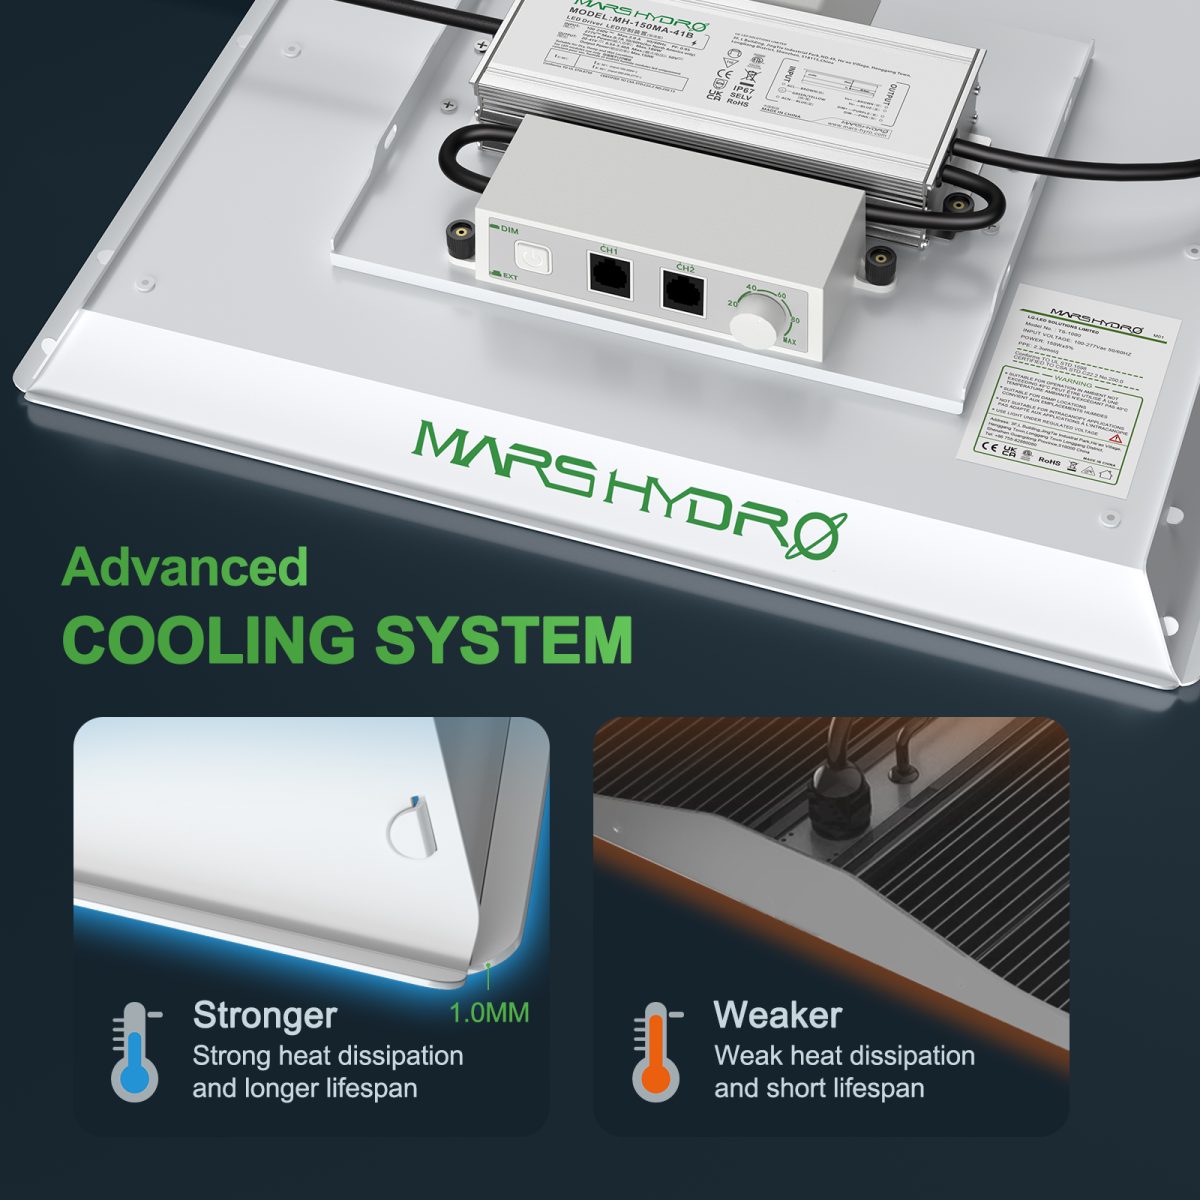 Mars Hydro TS1000 cooling system